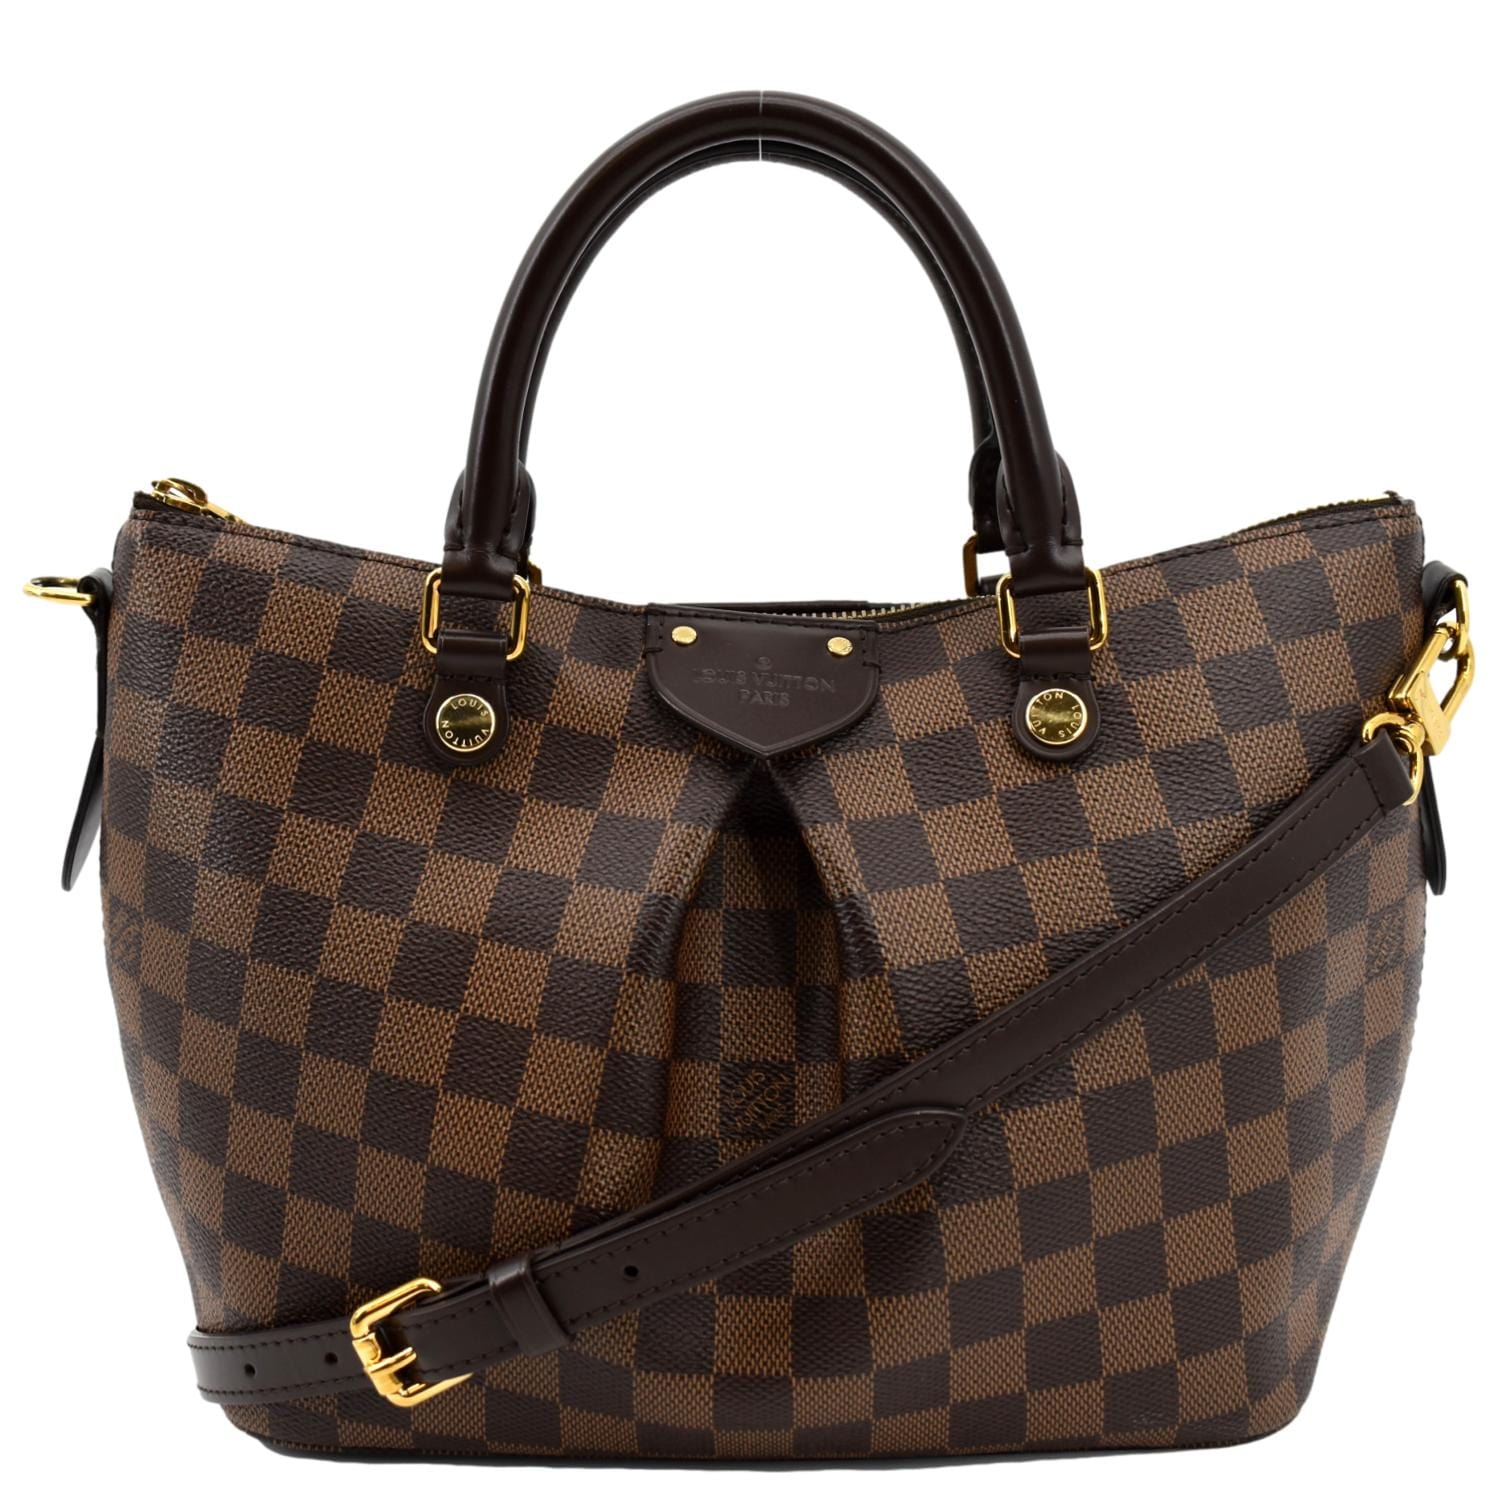 Crown Luxury Resale - Louis Vuitton Siena PM $1295 and Neverfull